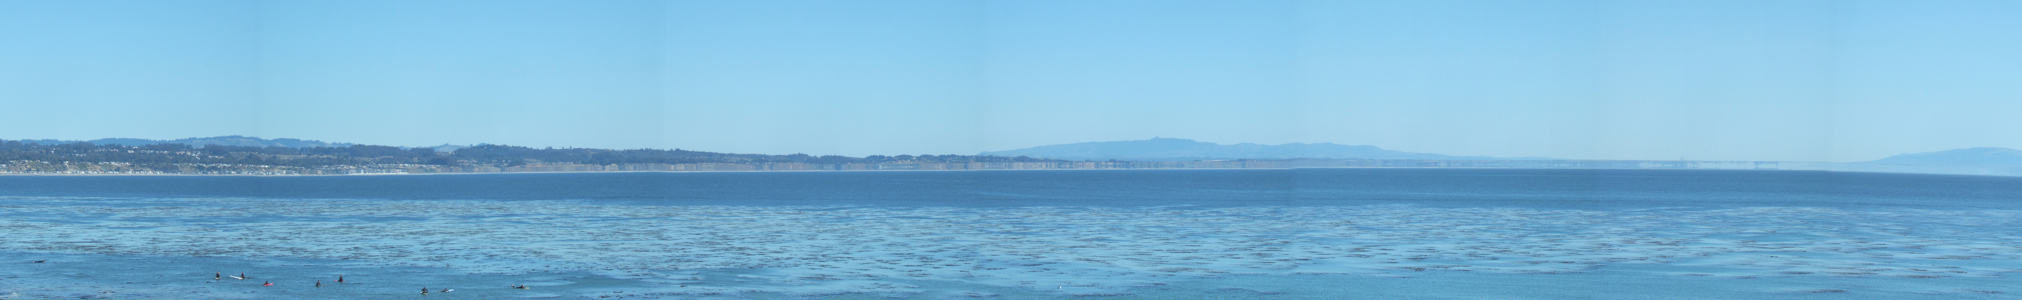 Monterey Bay from Pleasure Point - 3/2012